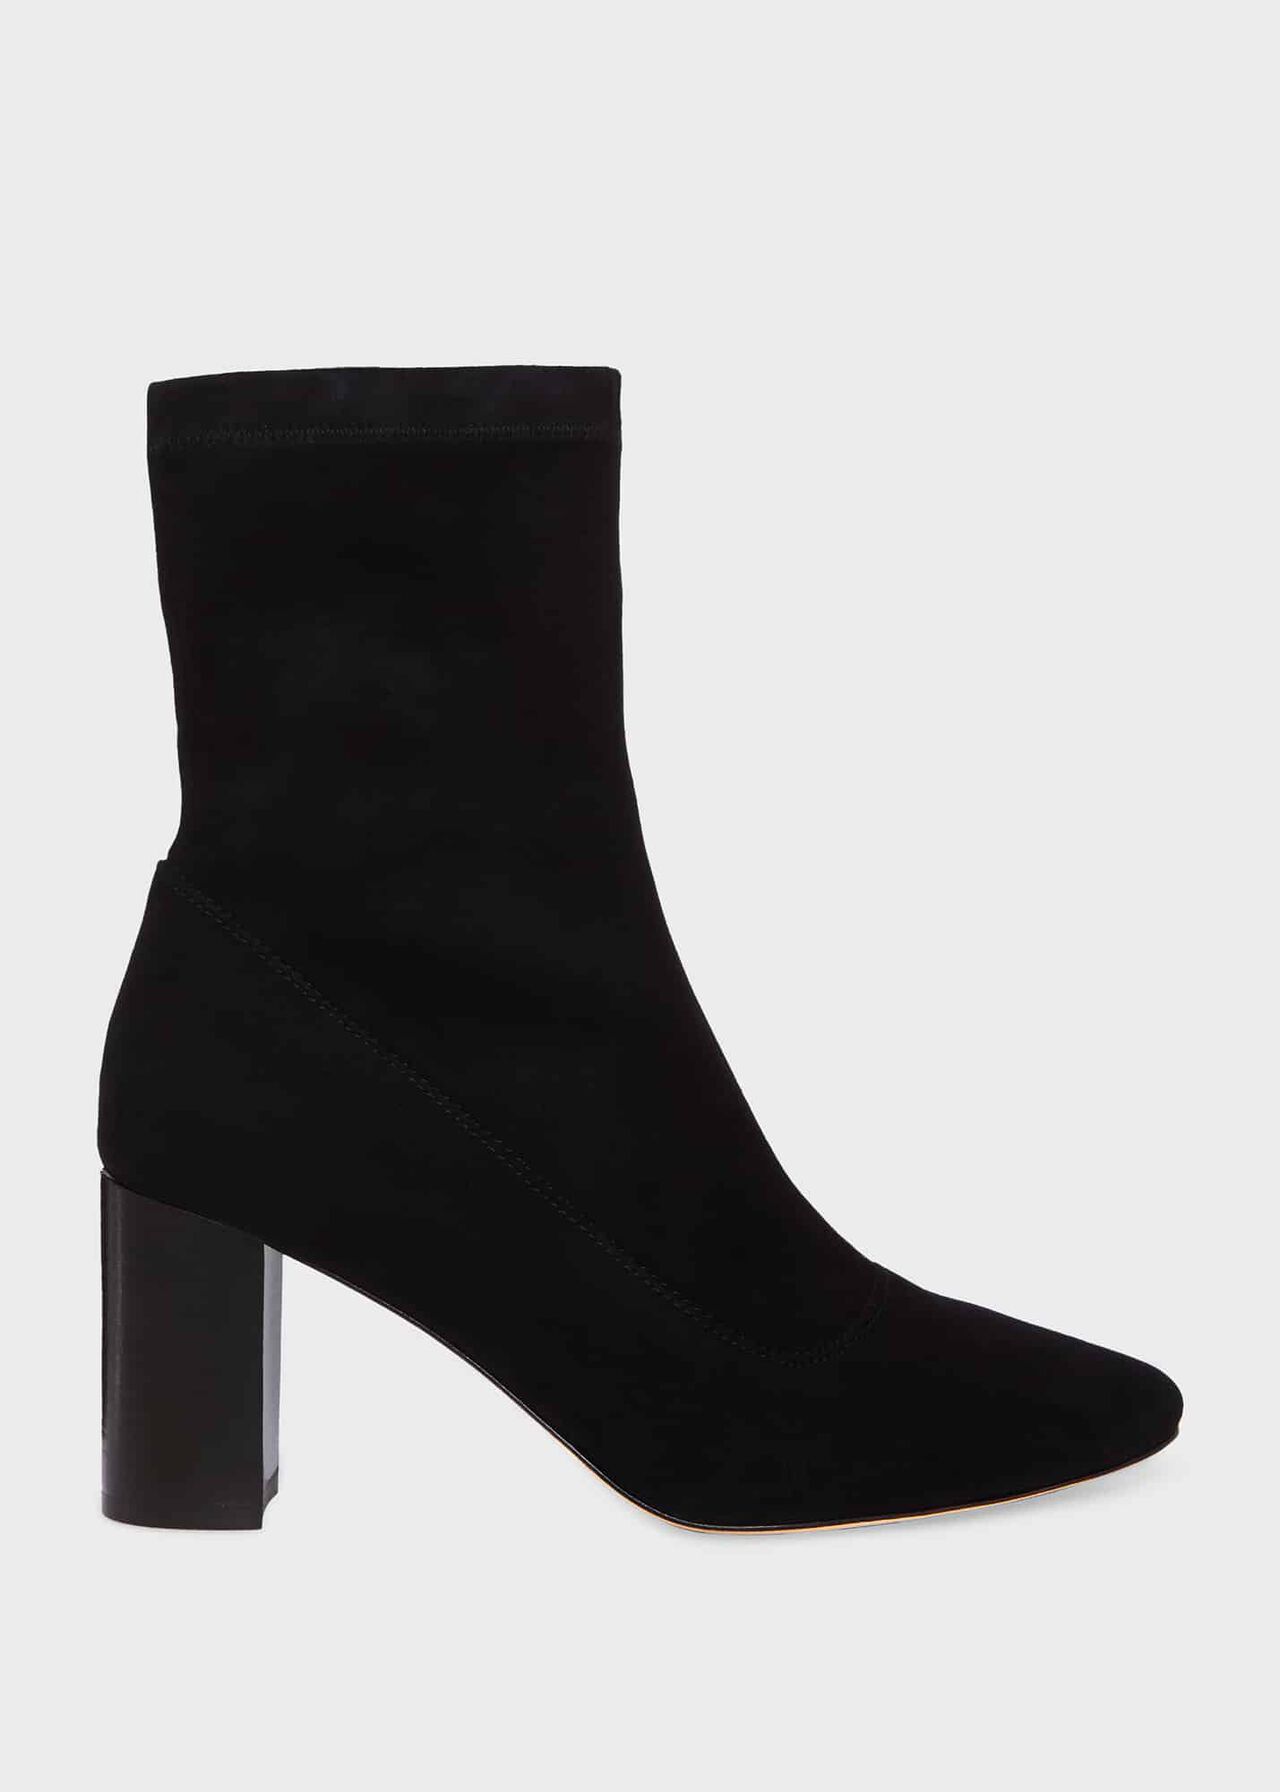 Zoey Ankle Boots, Black, hi-res